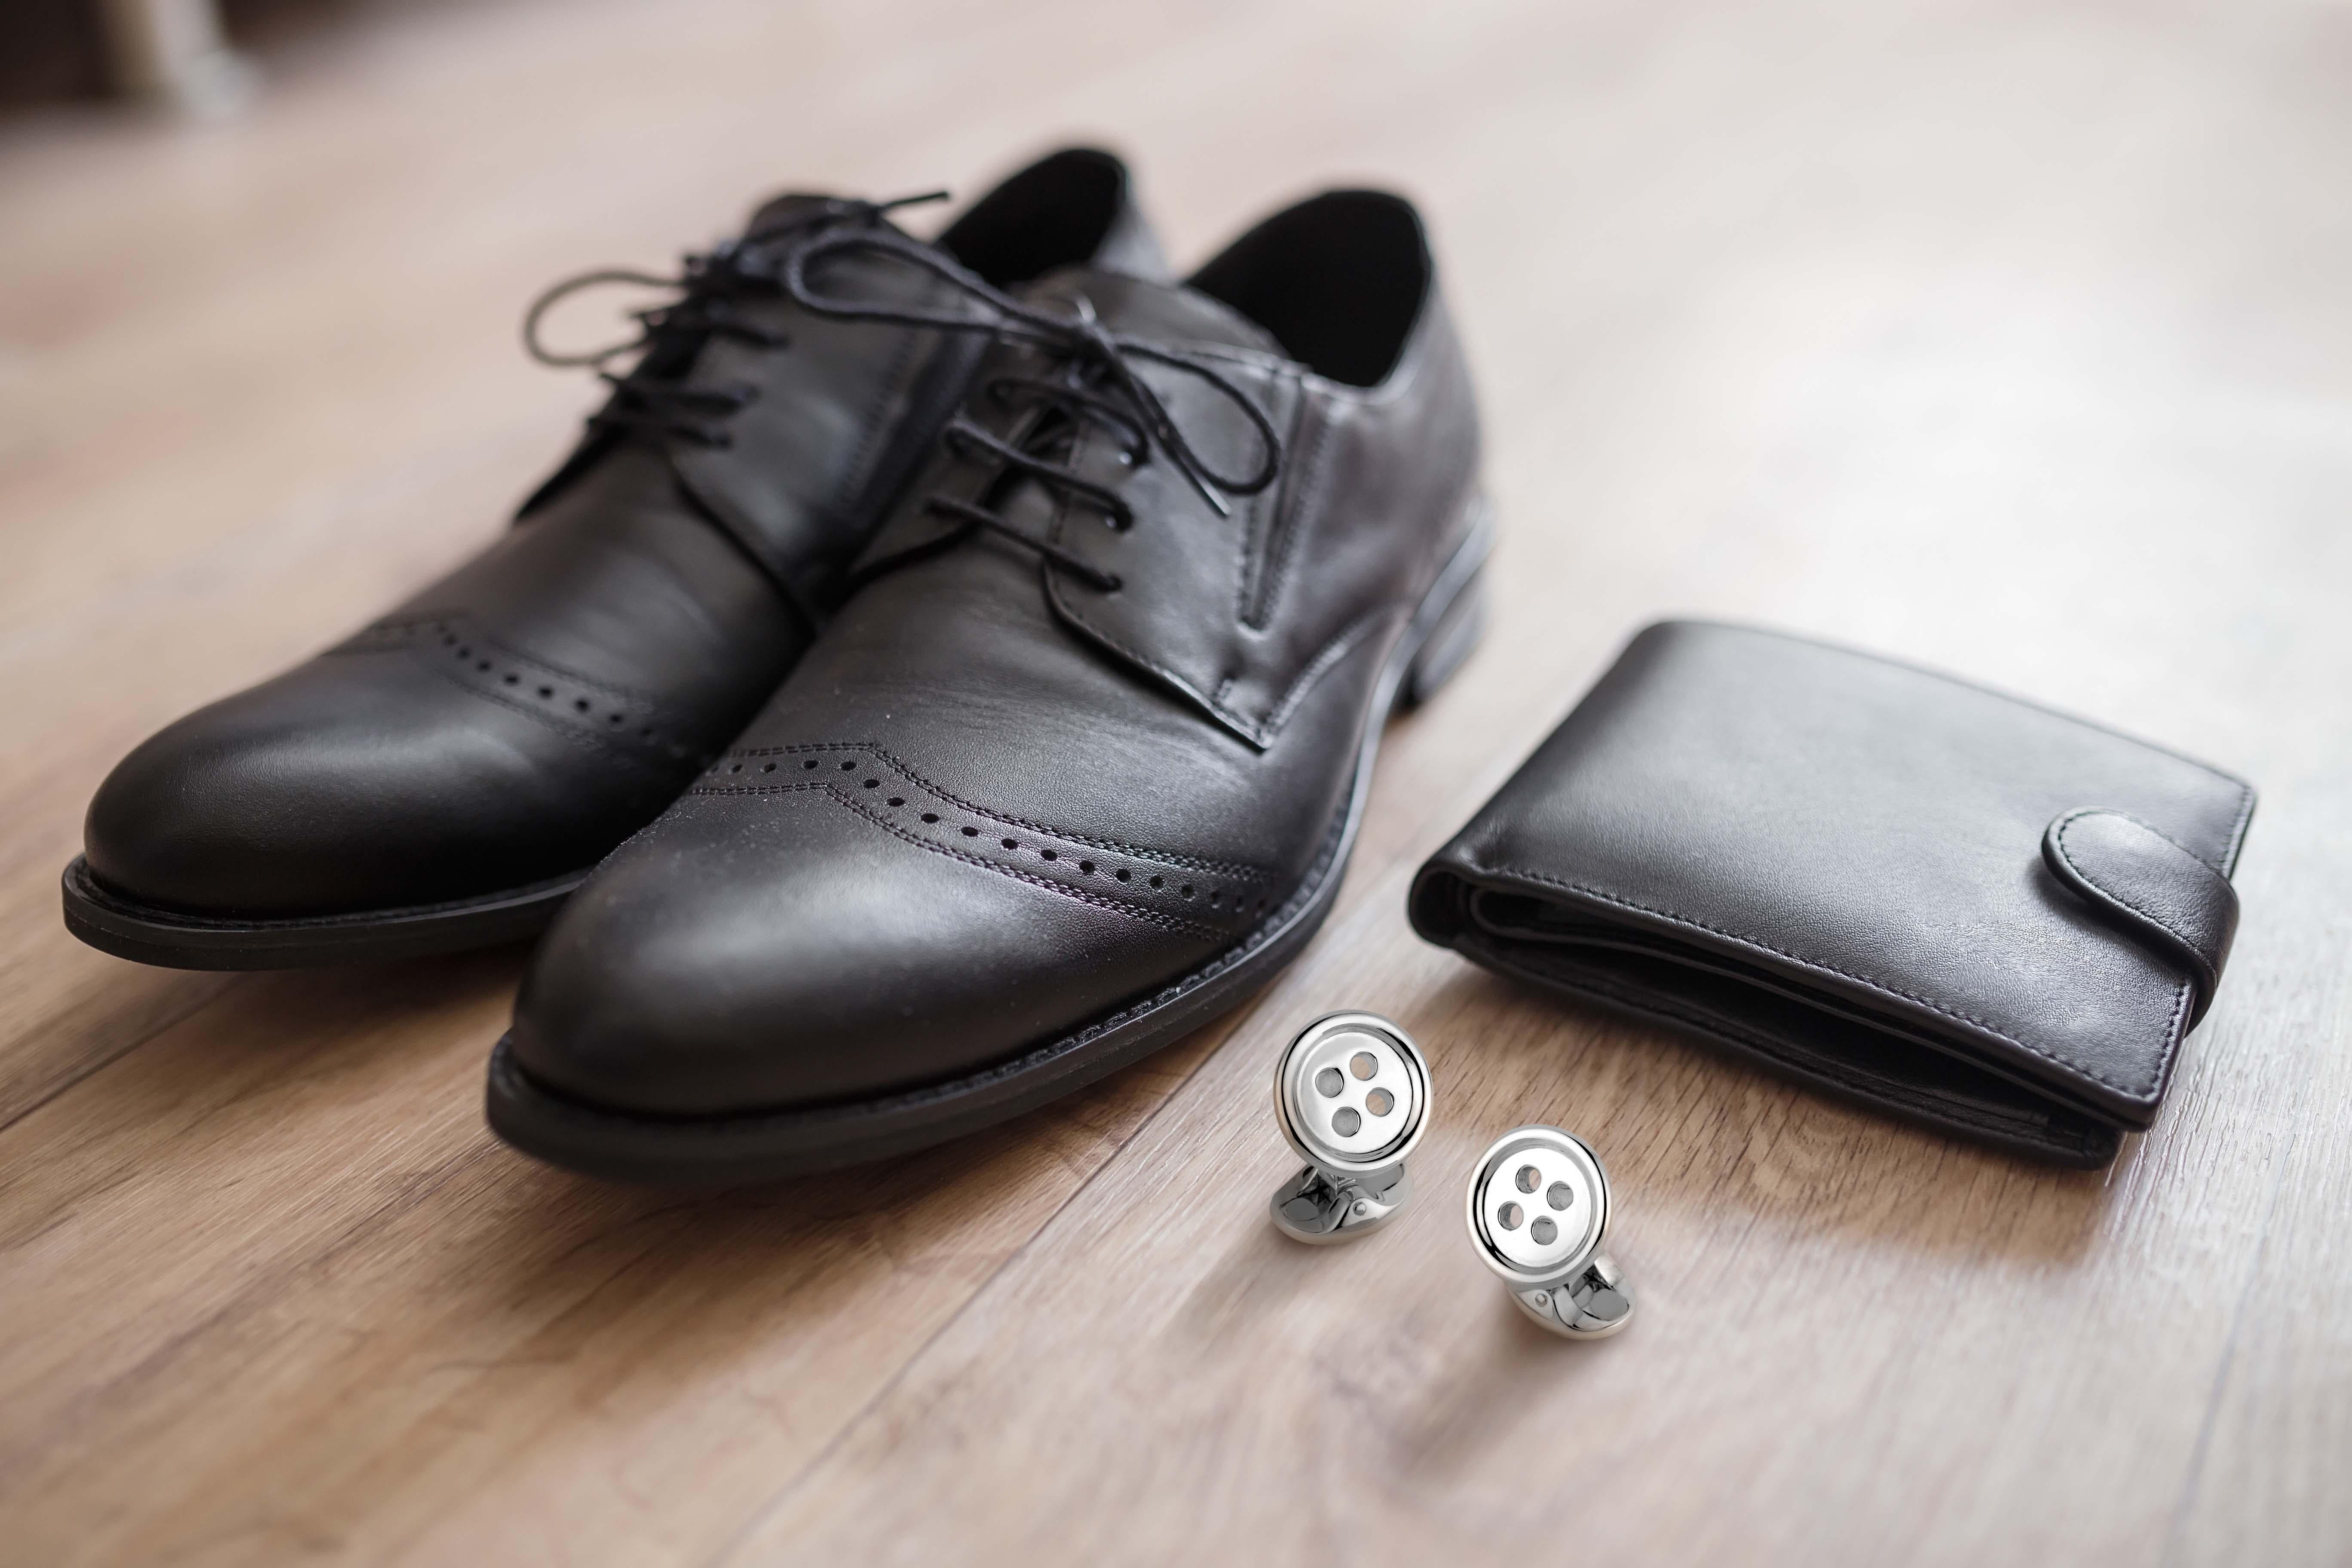 DEAKIN & FRANCIS, Piccadilly Arcade, London

All shirts come with buttons, but make yours stand out with these classic, highly polished button cufflinks that will last a life time.
Exuding traditional elegance, these designs are a staple part of any